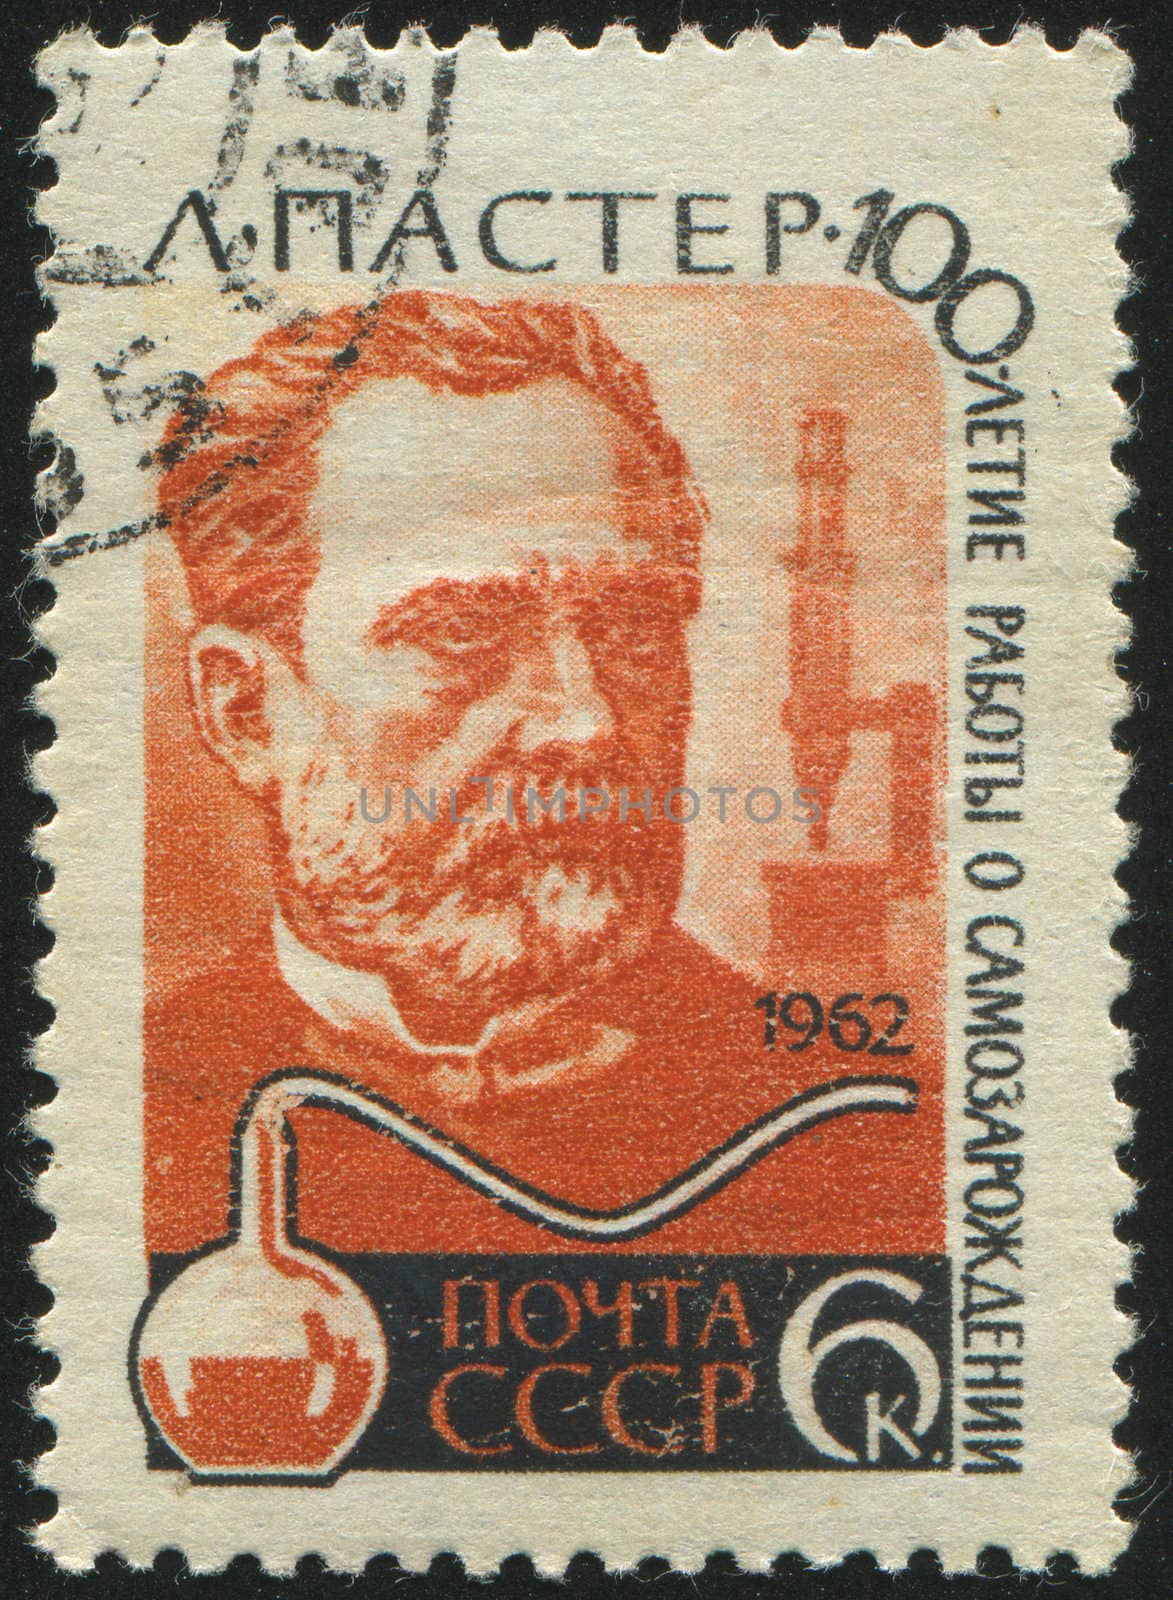 RUSSIA - CIRCA 1962: stamp printed by Russia, shows Louis Pasteur, circa 1962.